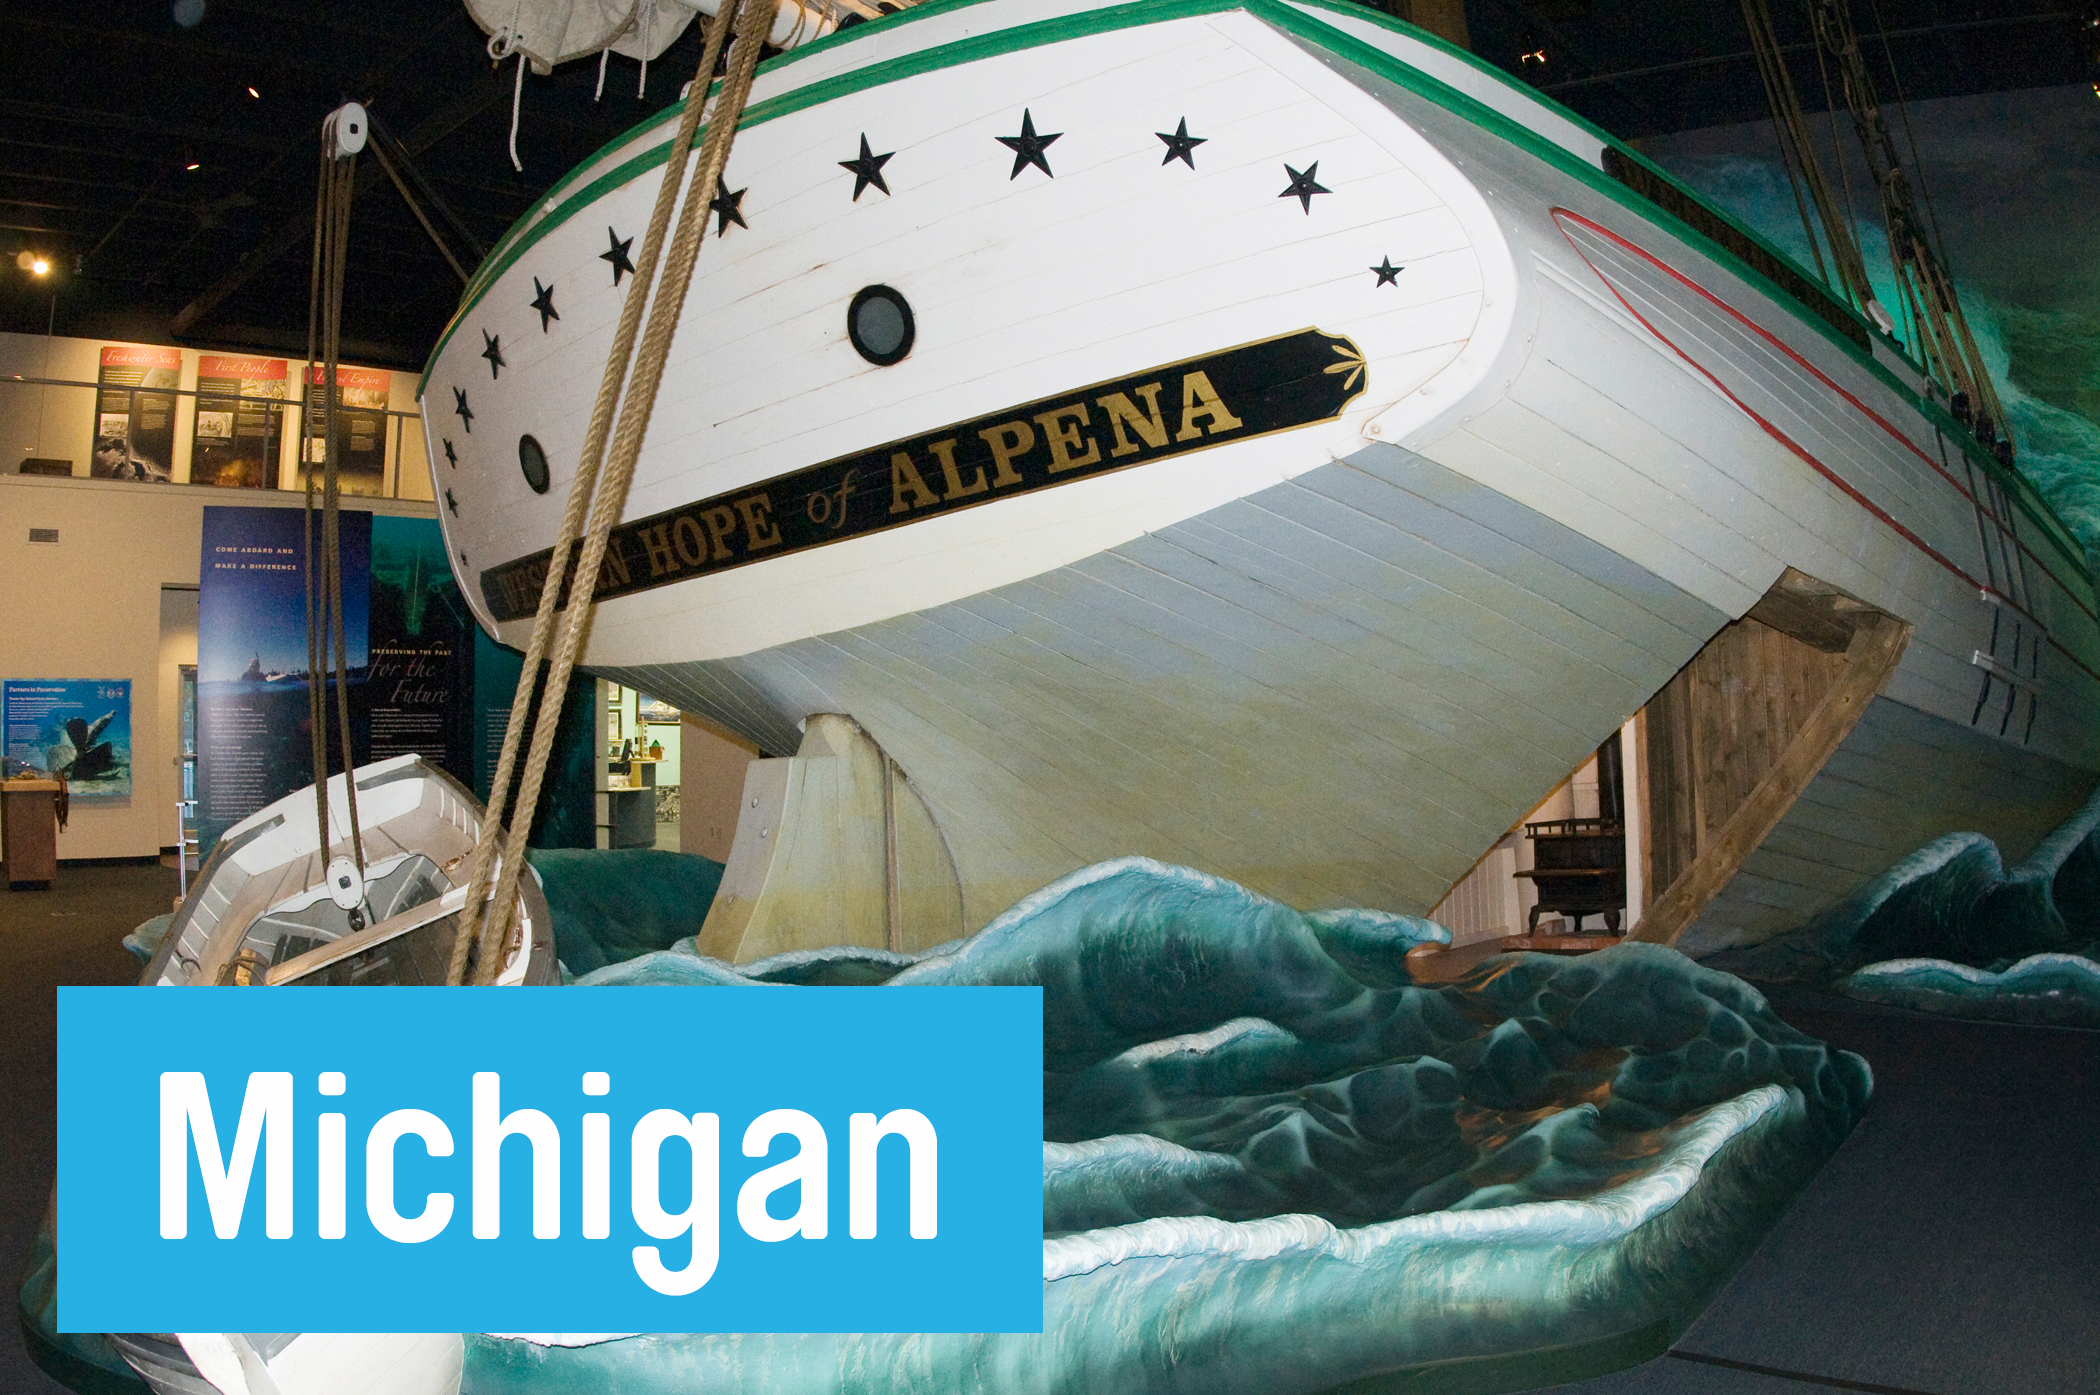 Ride out a facsimile storm in a replica schooner at the <a href="http://thunderbay.noaa.gov/maritime/glmhc.html" target="_blank">Great Lakes Maritime Heritage Center </a> before eyeballing the shipwreck artifact gallery—and thanking your lucky stars you’re on dry land.